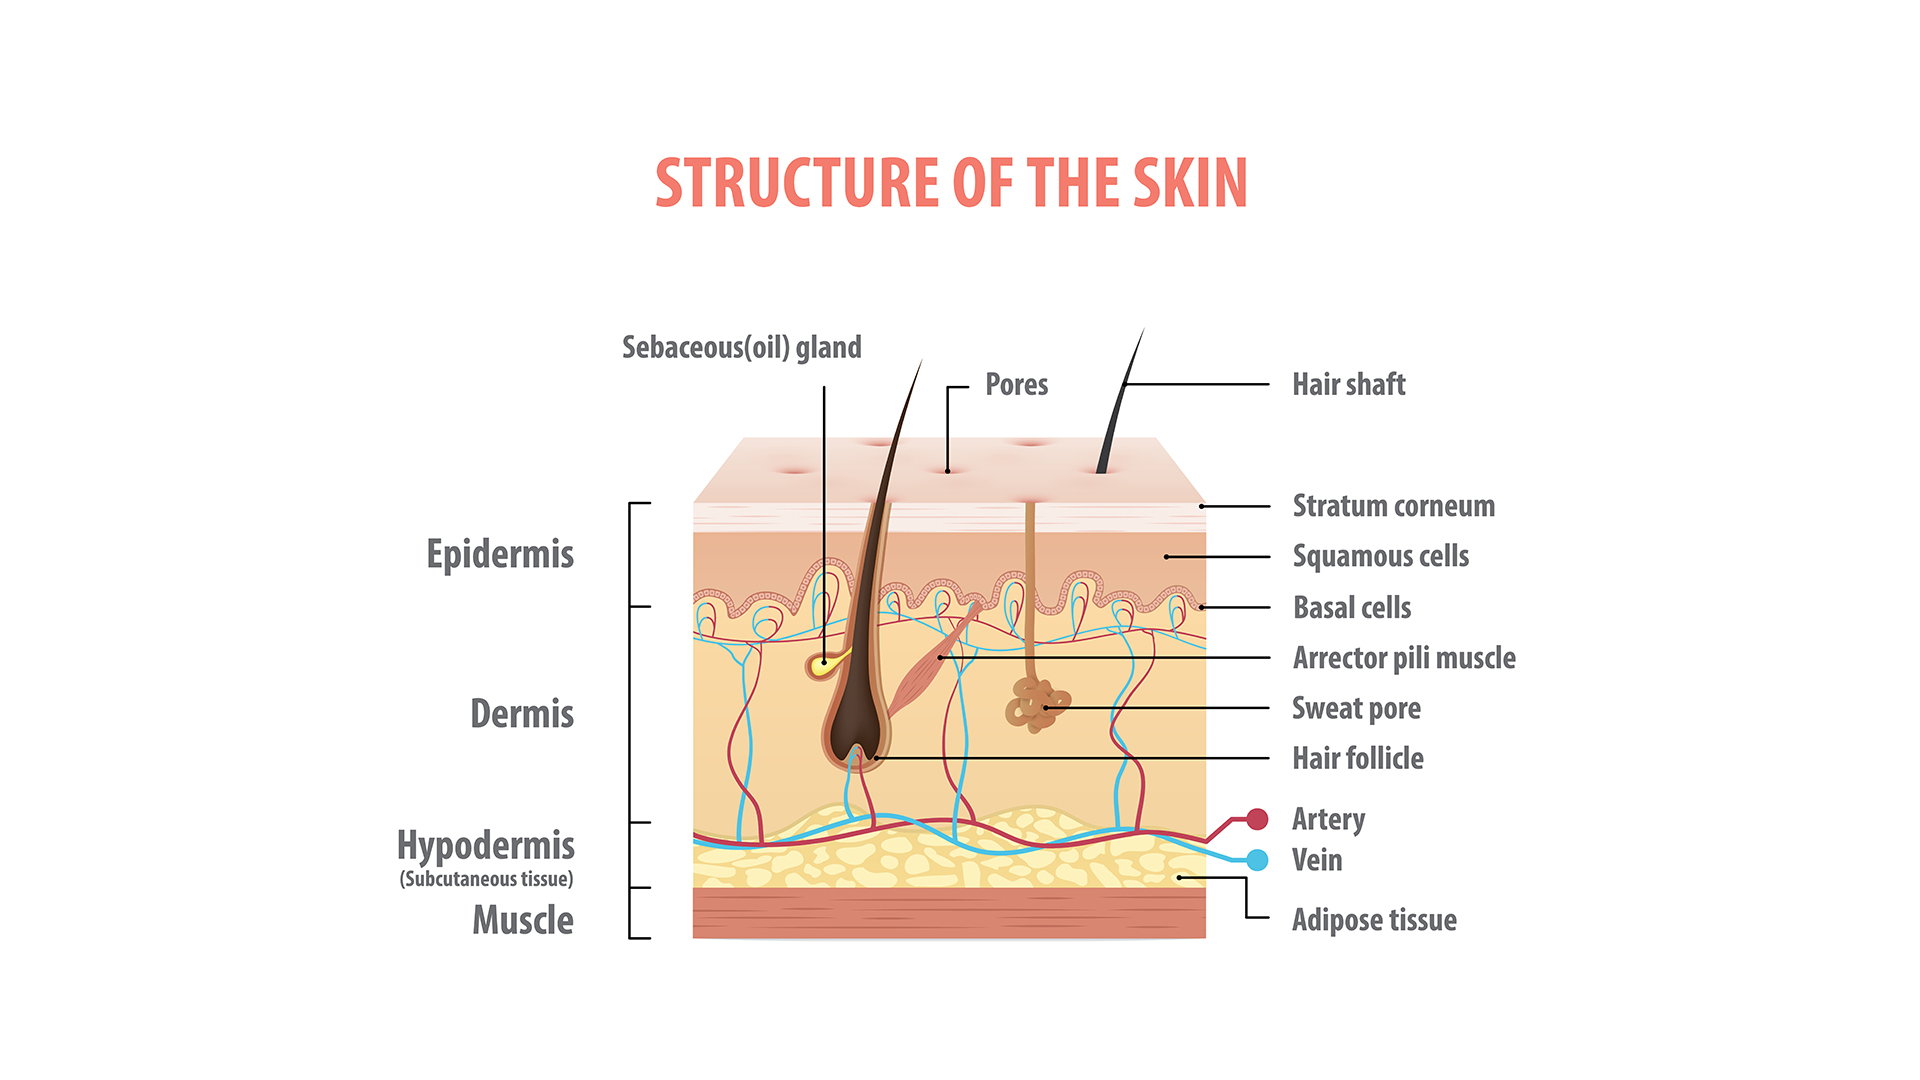 a labeled diagram shows the three layers of the skin (the epidermis, dermis, and hypodermins) as shown in cutaway